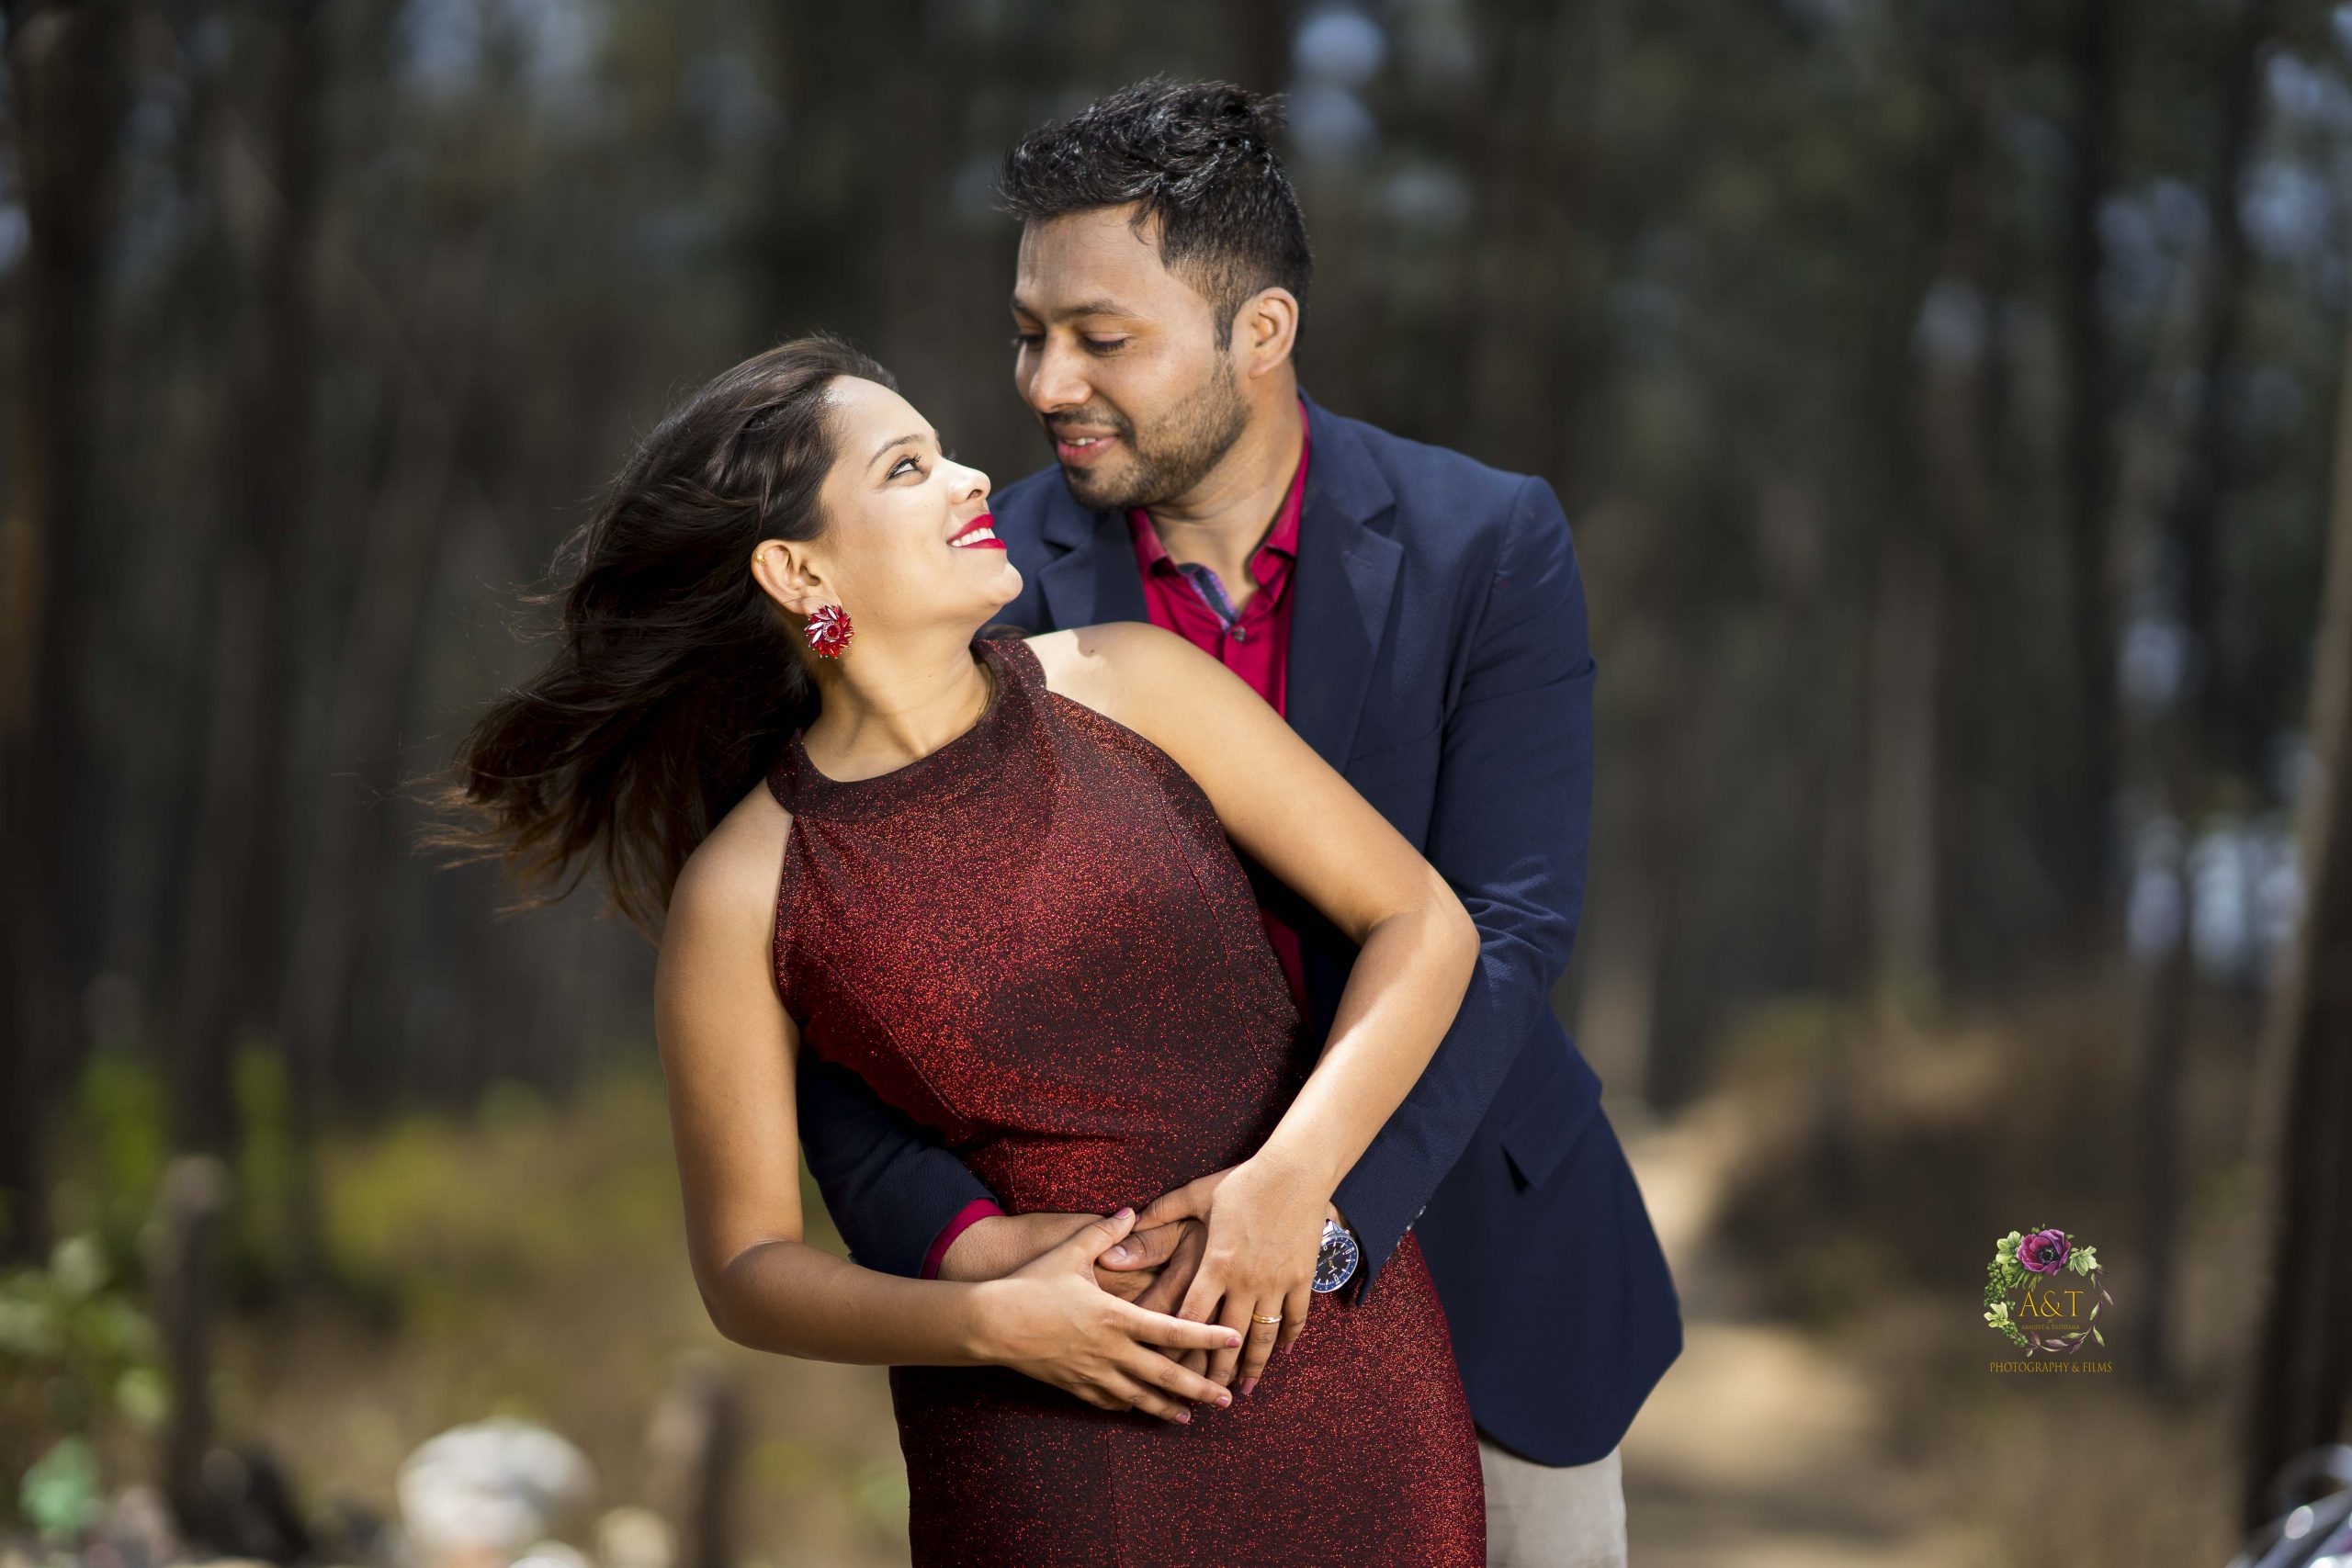 Cute Candid Wedding Poses For Couples That Have To Be Bookmarked